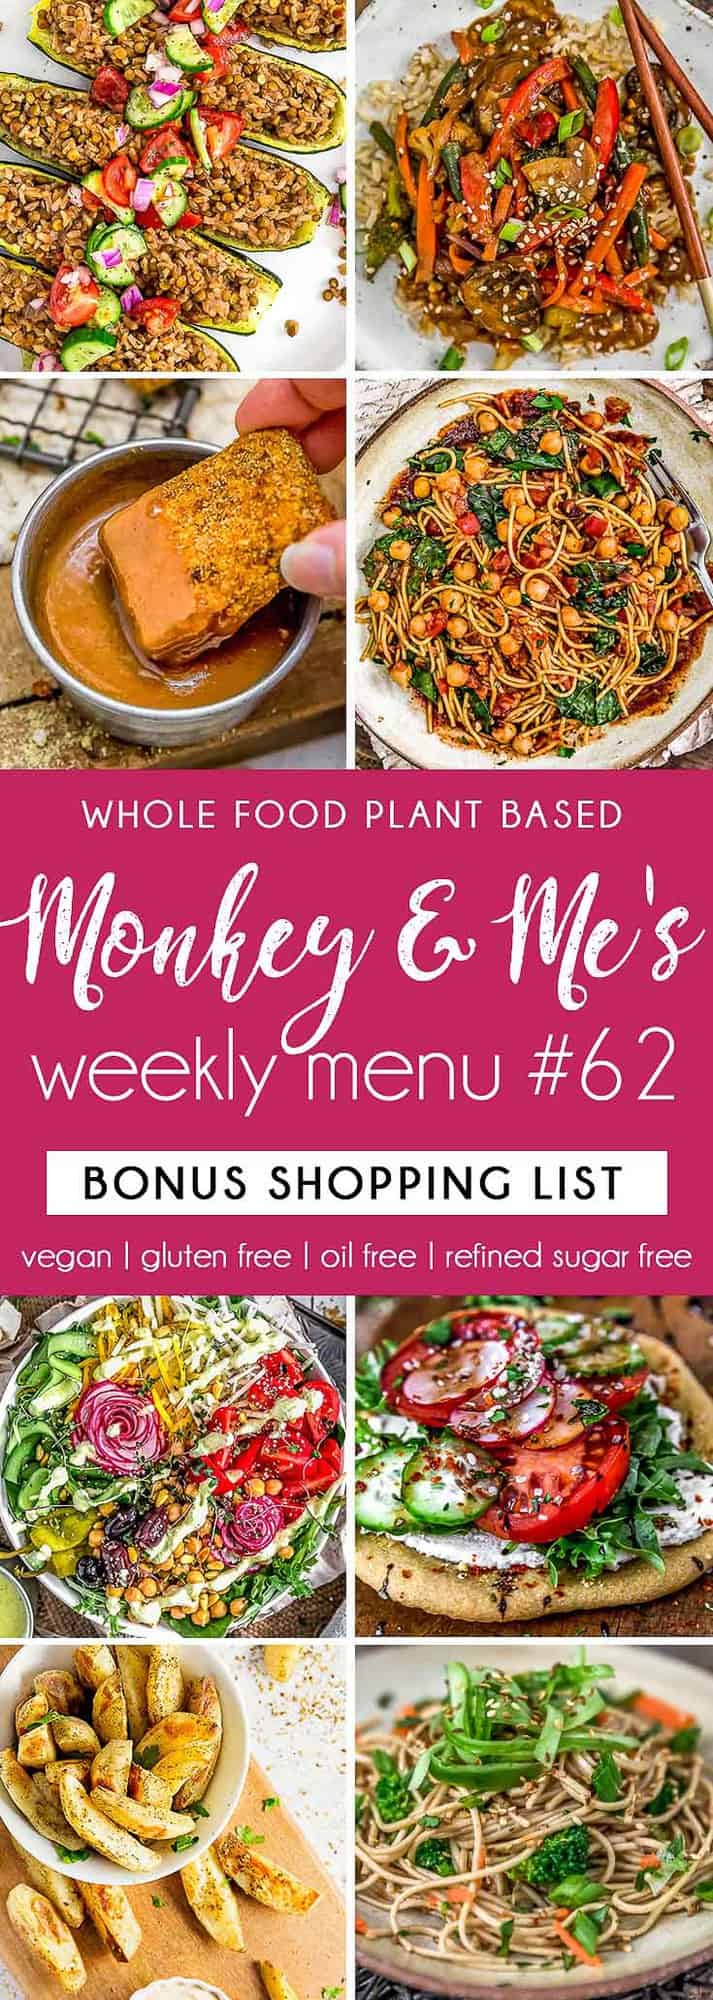 Monkey and Me's Menu 62 featuring 8 recipes